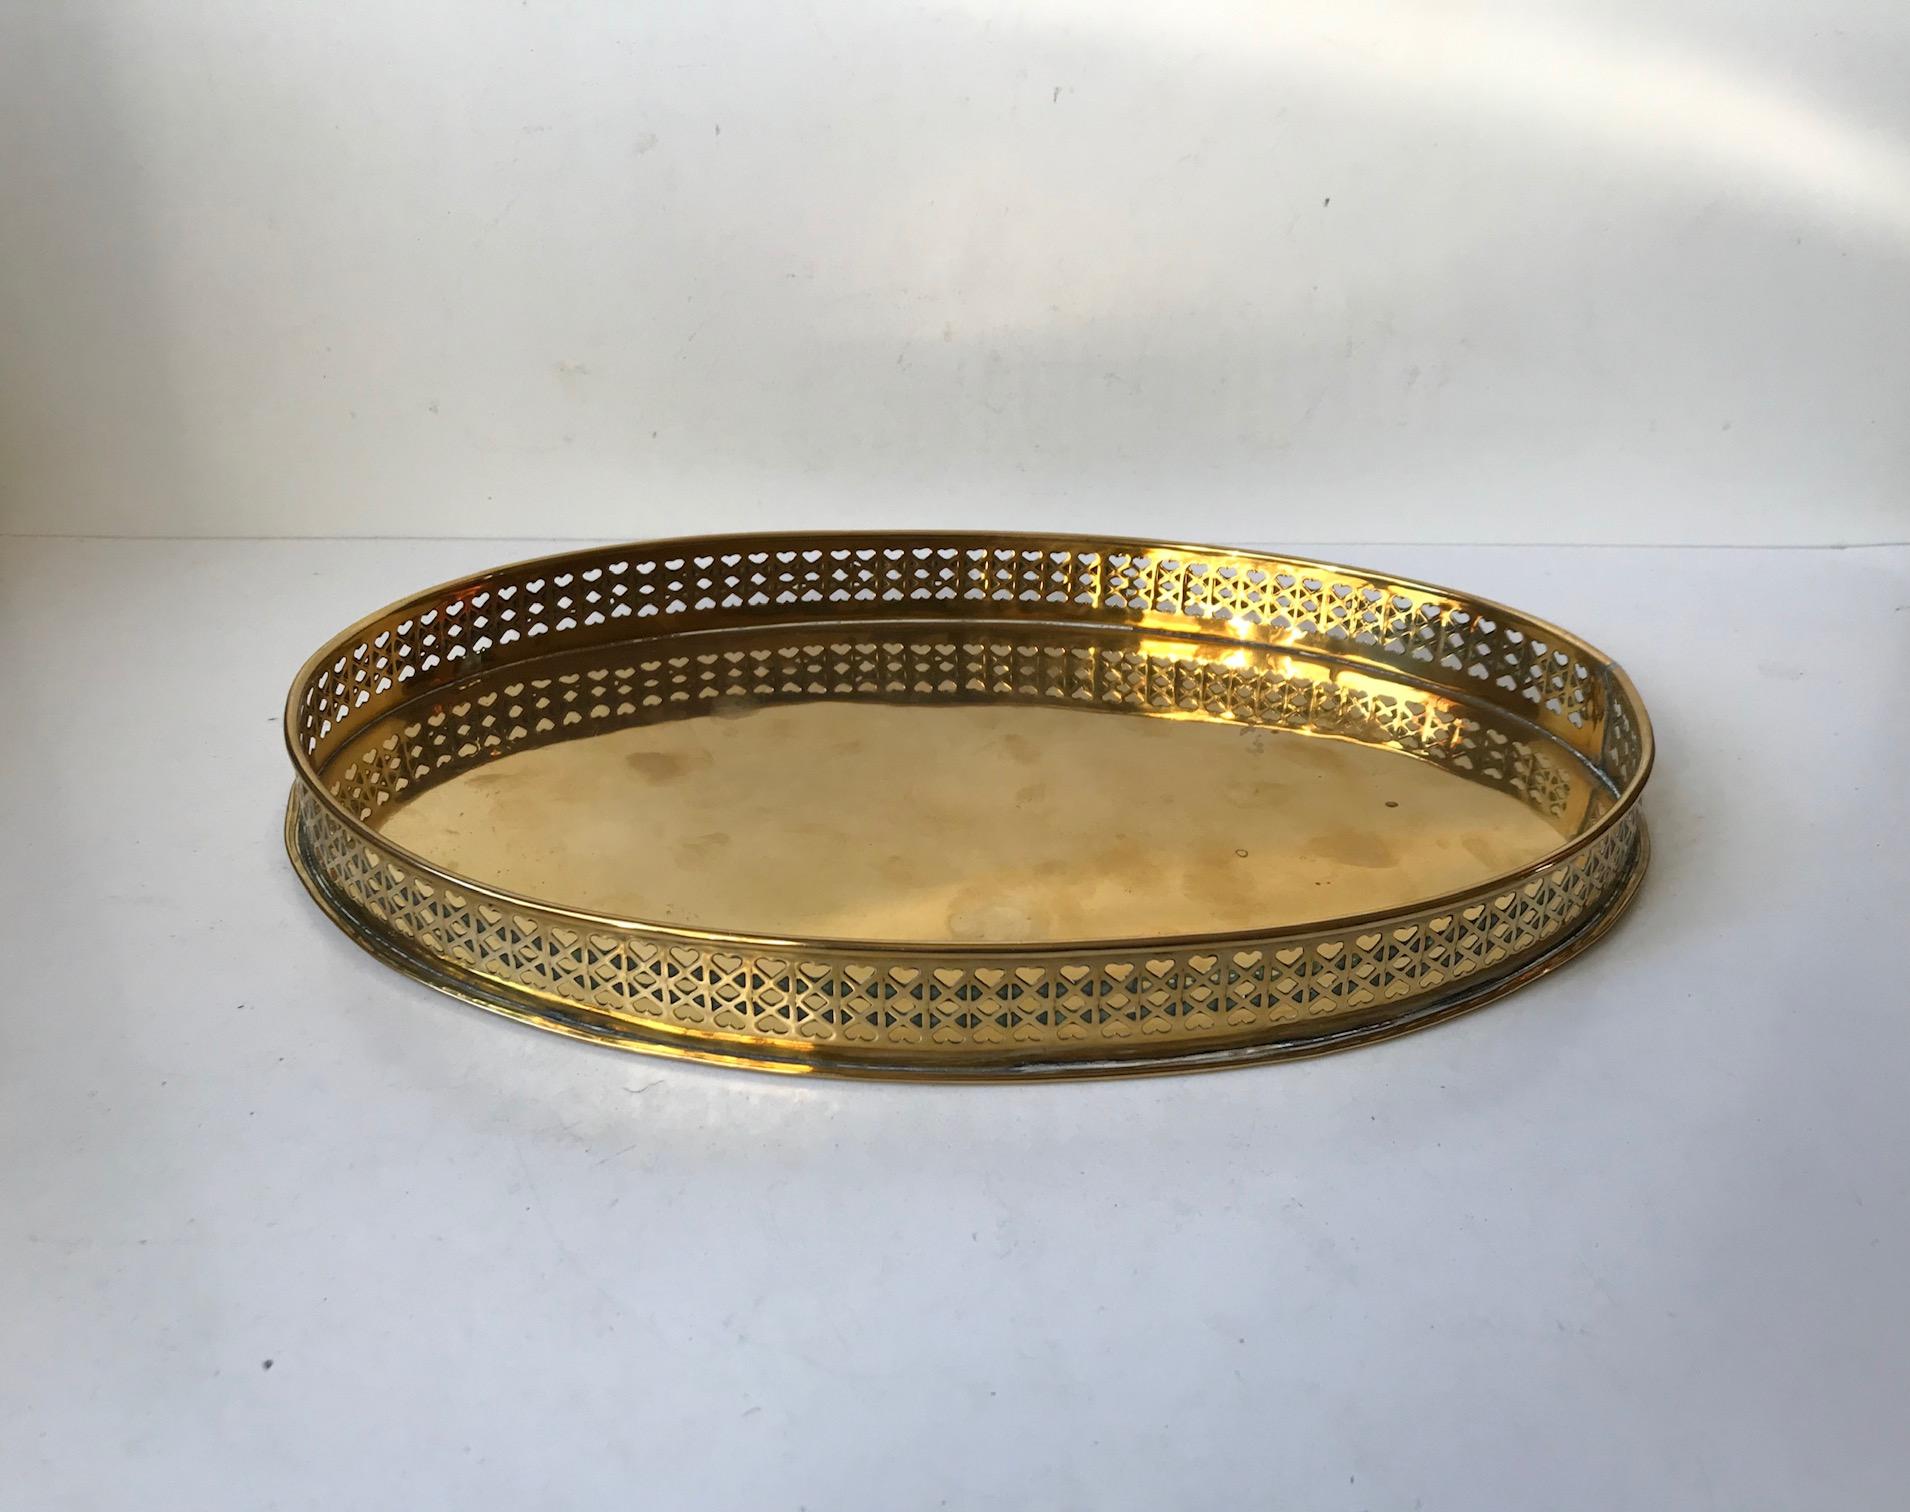 A Danish tray fashioned from partially heart-perforated brass. It was made by Jacob Worm during the late 1960s in a style reminiscent of Josef Frank. It is suitable for serving drinks or as a 1-2 person breakfast tray.